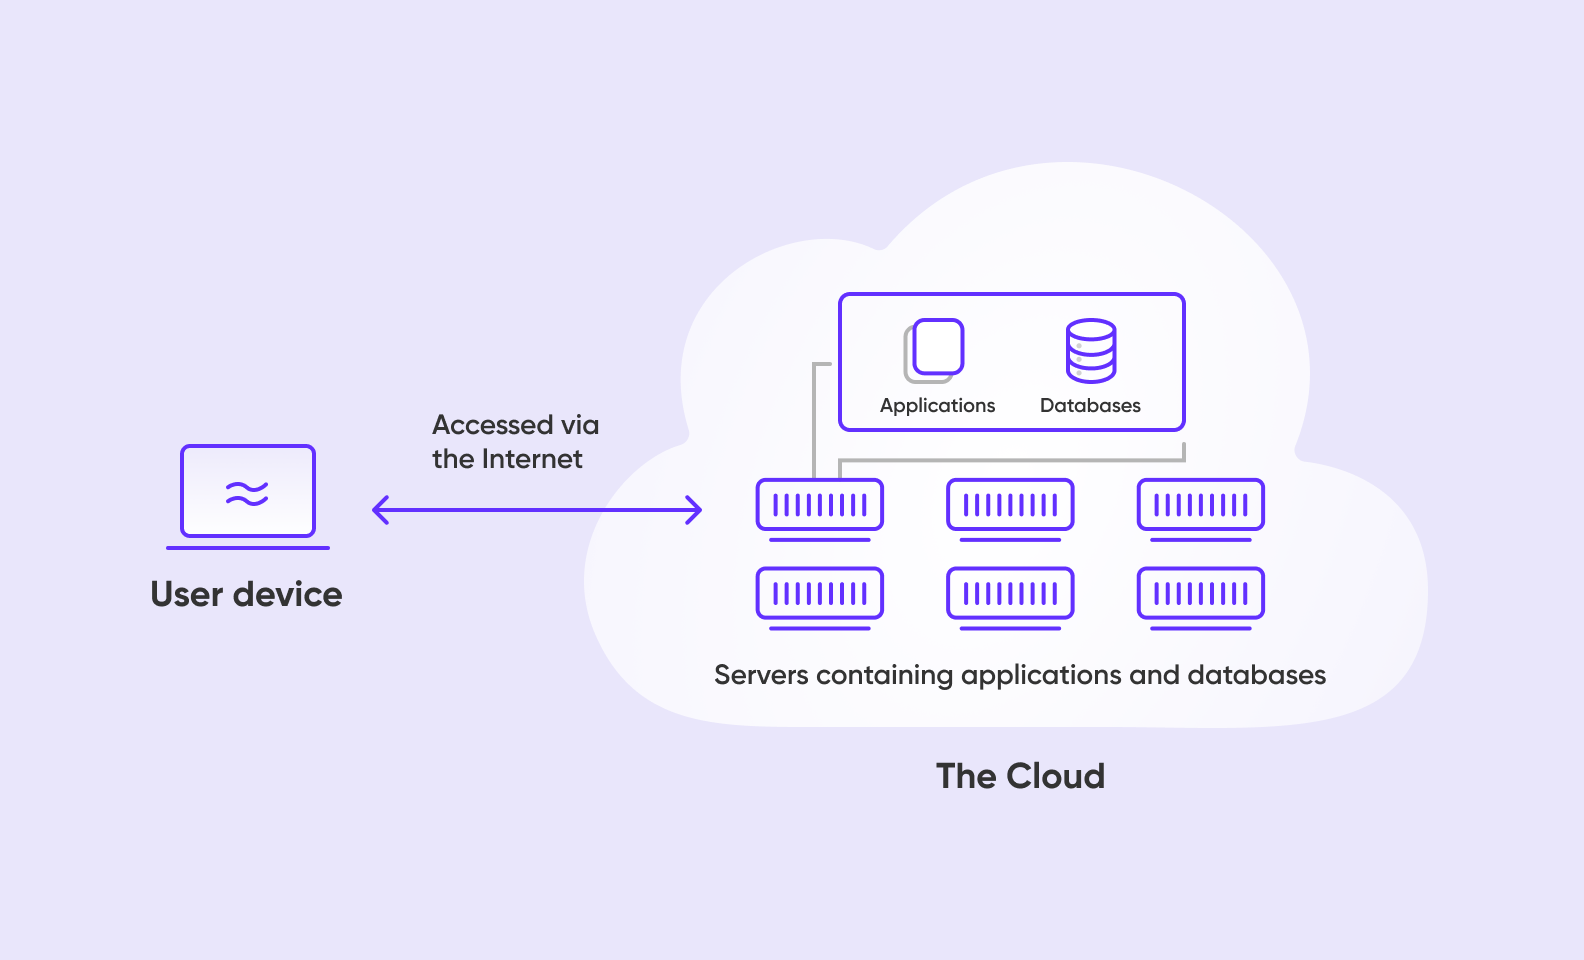 Cloud apps are stored on virtual servers